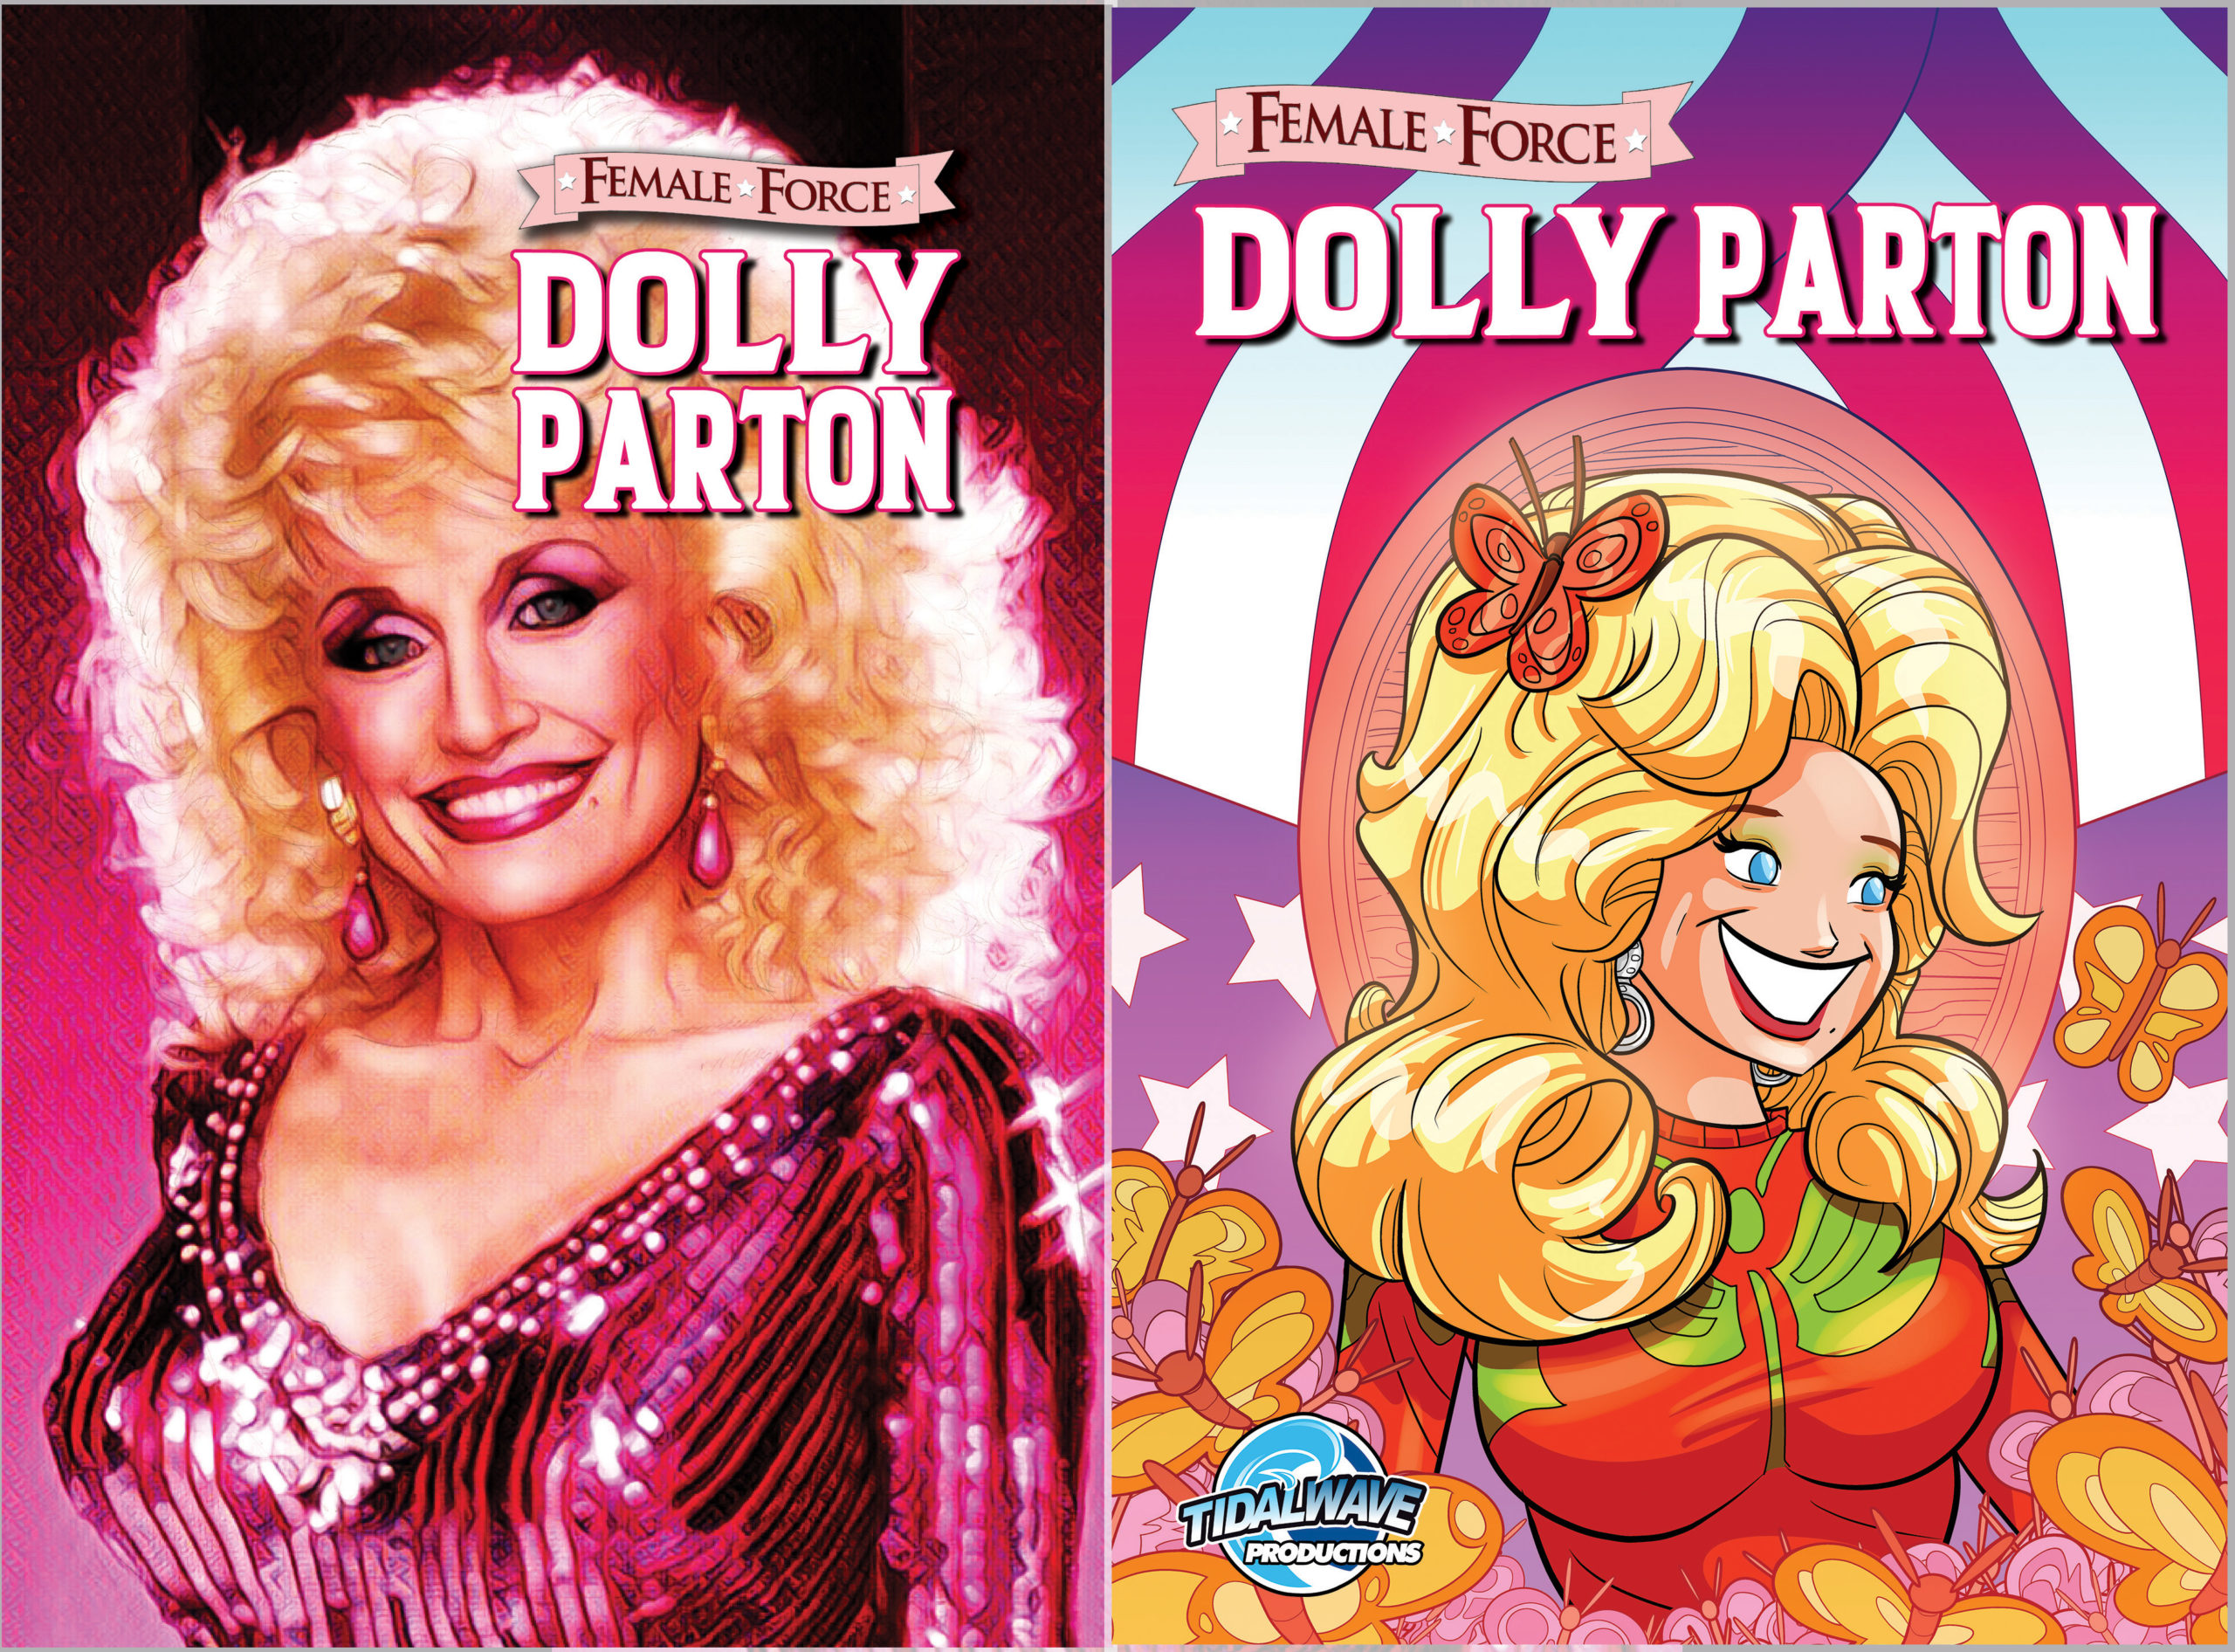 DOLLY PARTON LIFE STORY FEATURED IN NEW COMIC BOOK TidalWave Productions